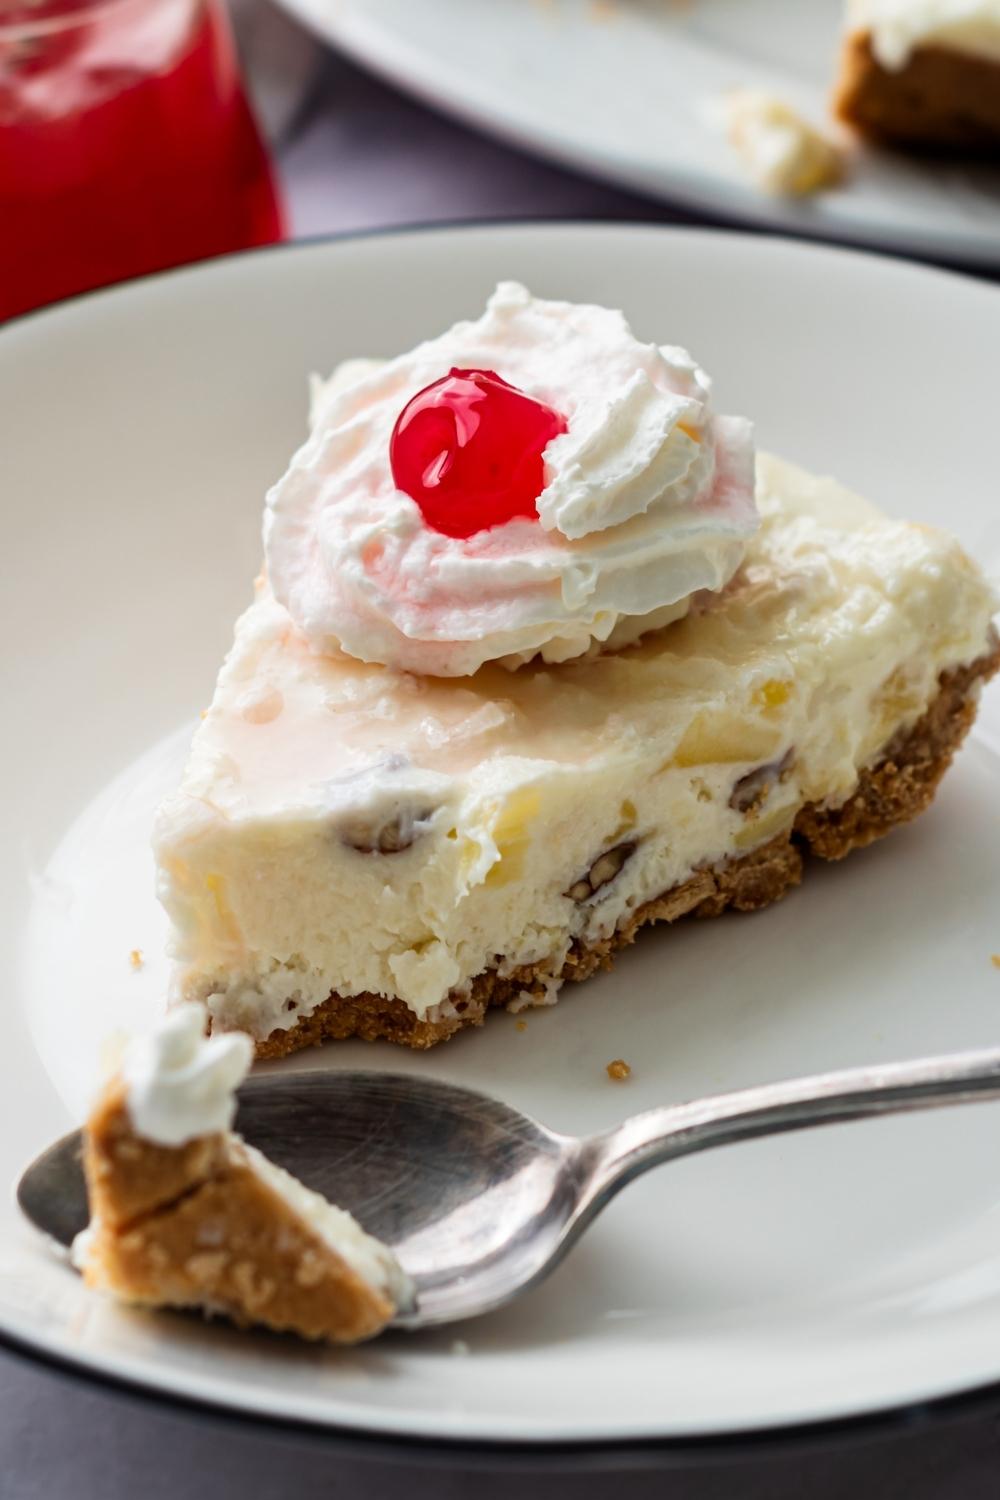 A close up of a serving dish with 1 slice of million dollar pie topped with whipped cream and a cherry. A spoon has a piece of million dollar pie in it.